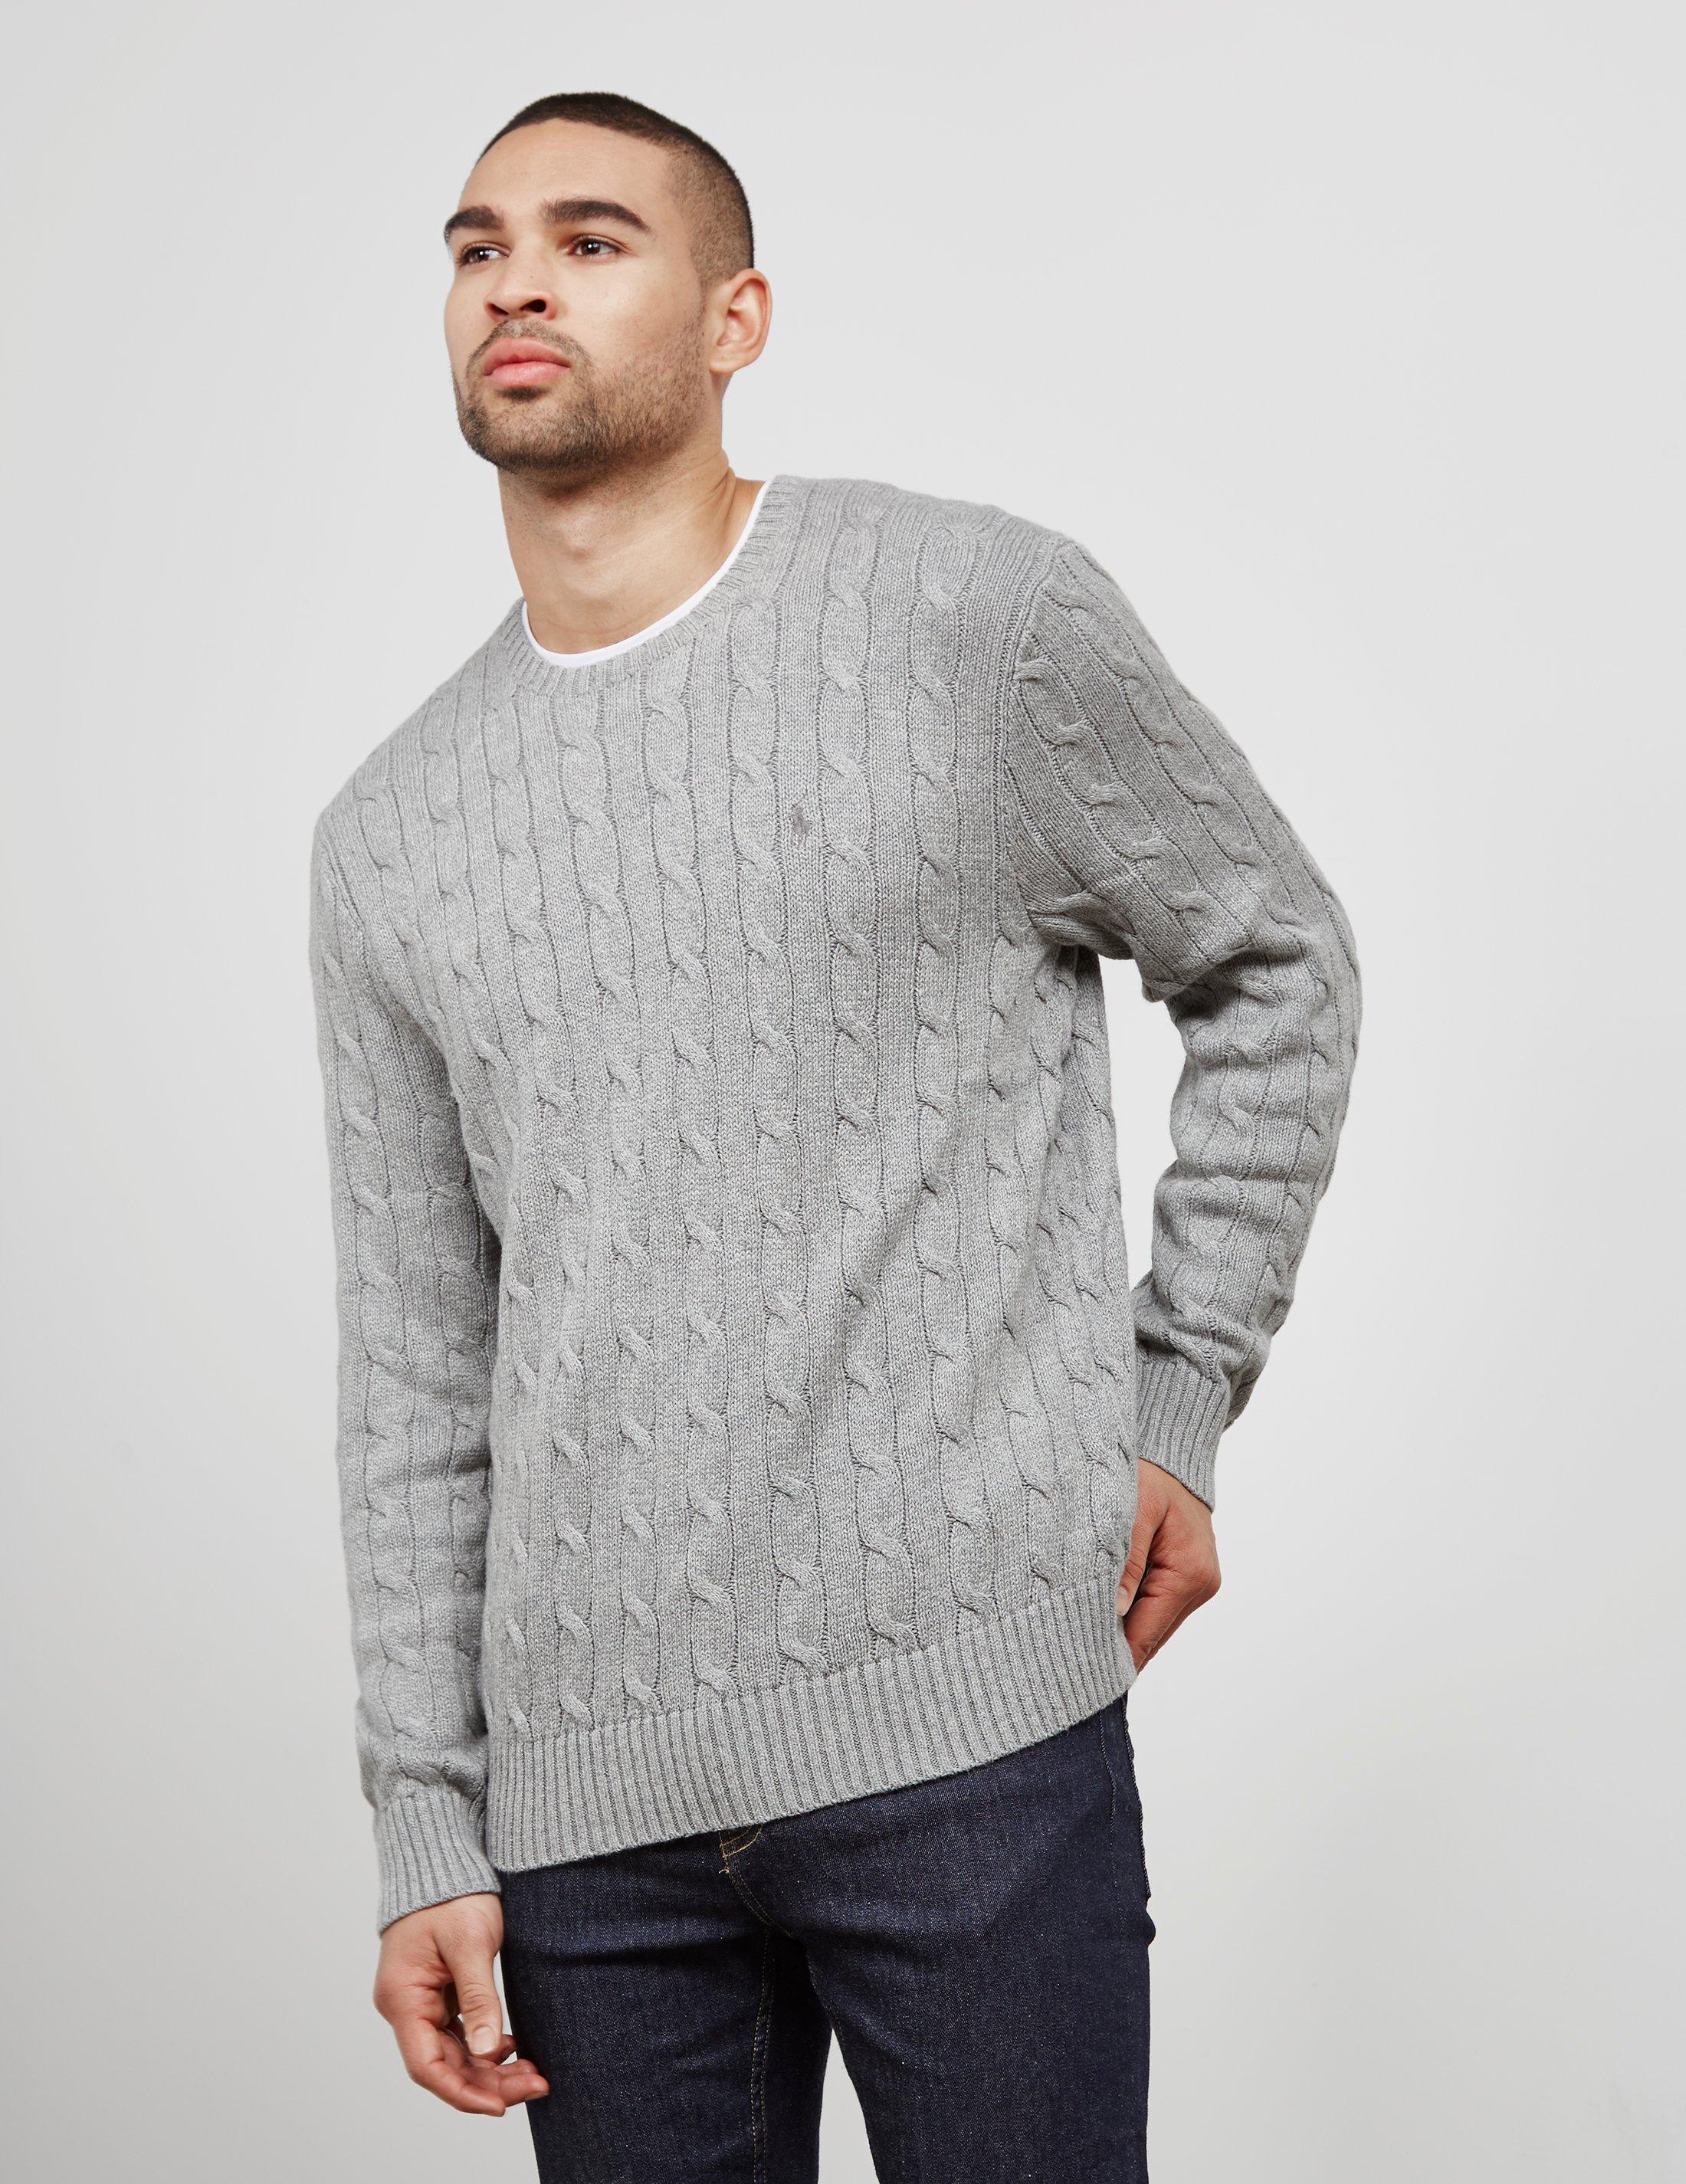 Polo Ralph Lauren Mens Cable Knitted Jumper Grey in Gray for Men - Lyst